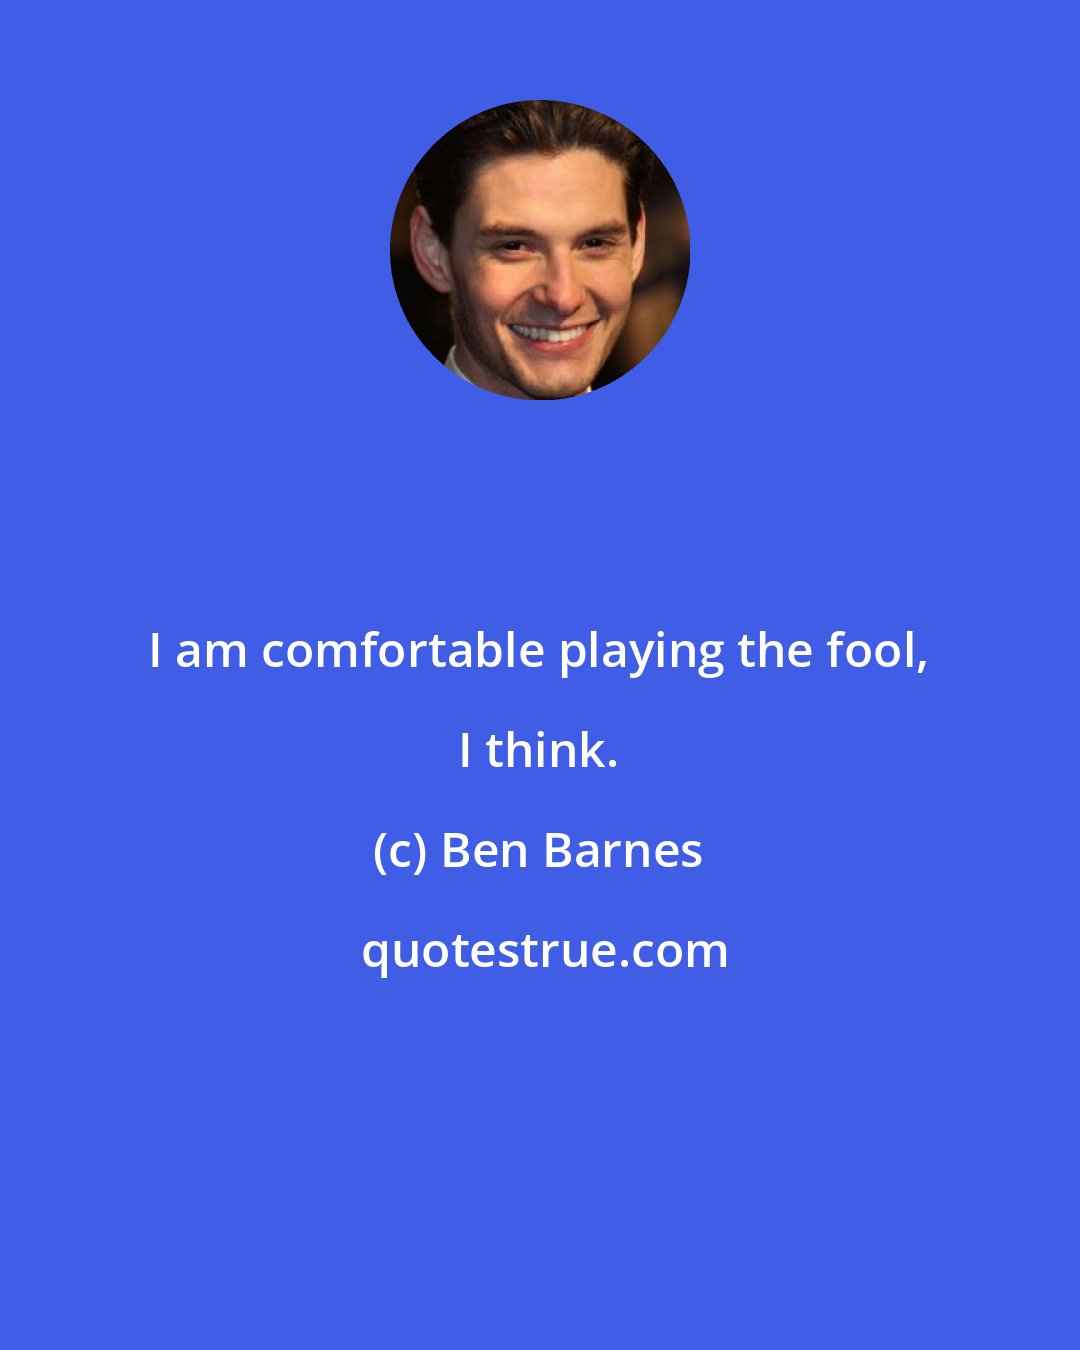 Ben Barnes: I am comfortable playing the fool, I think.